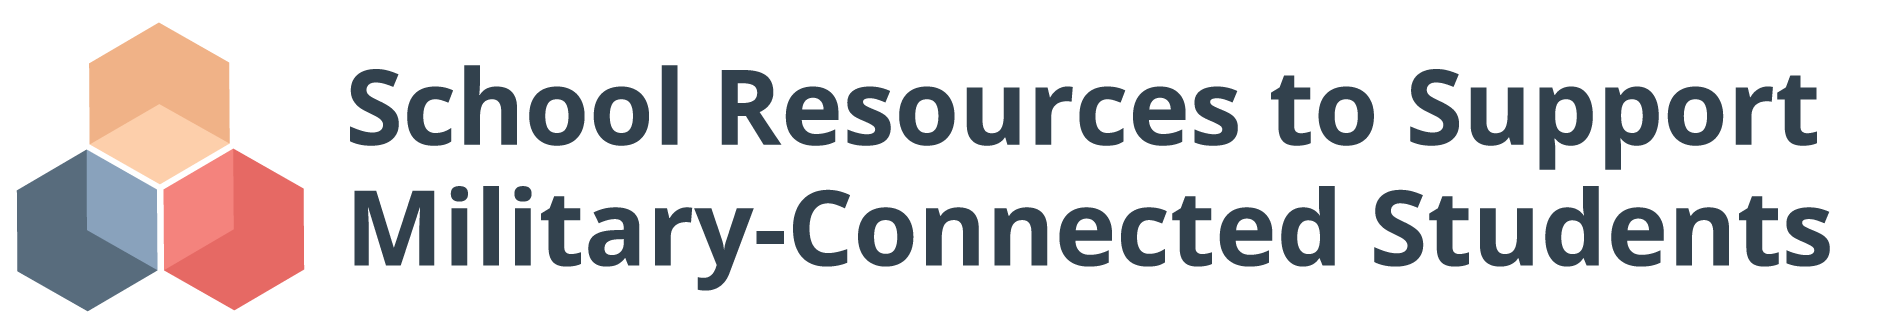 School Resources to Support Military-Connected Students Logo